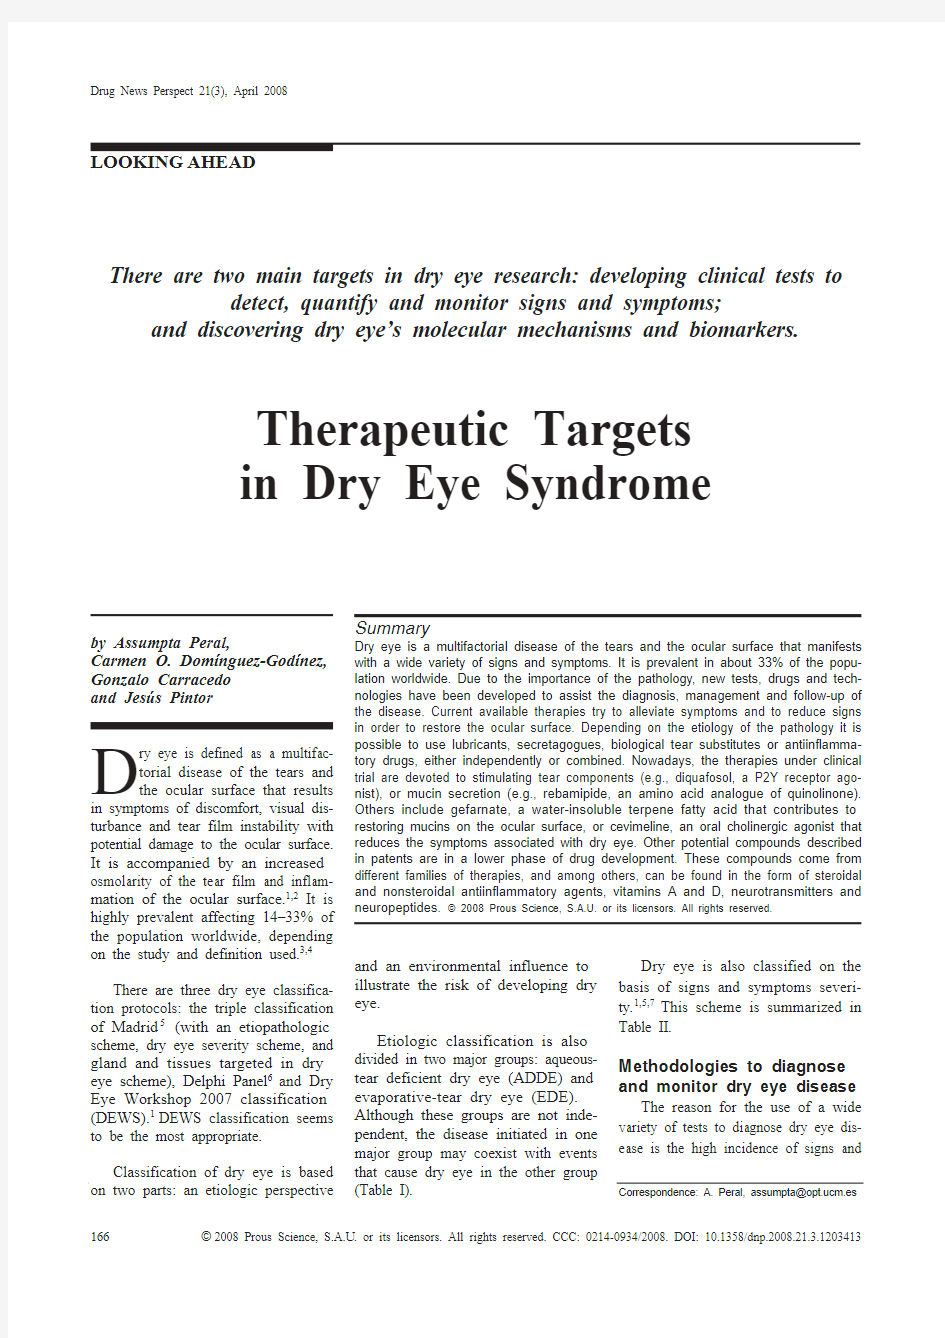 Therapeutic Targets in Dry Eye Syndrome,2008